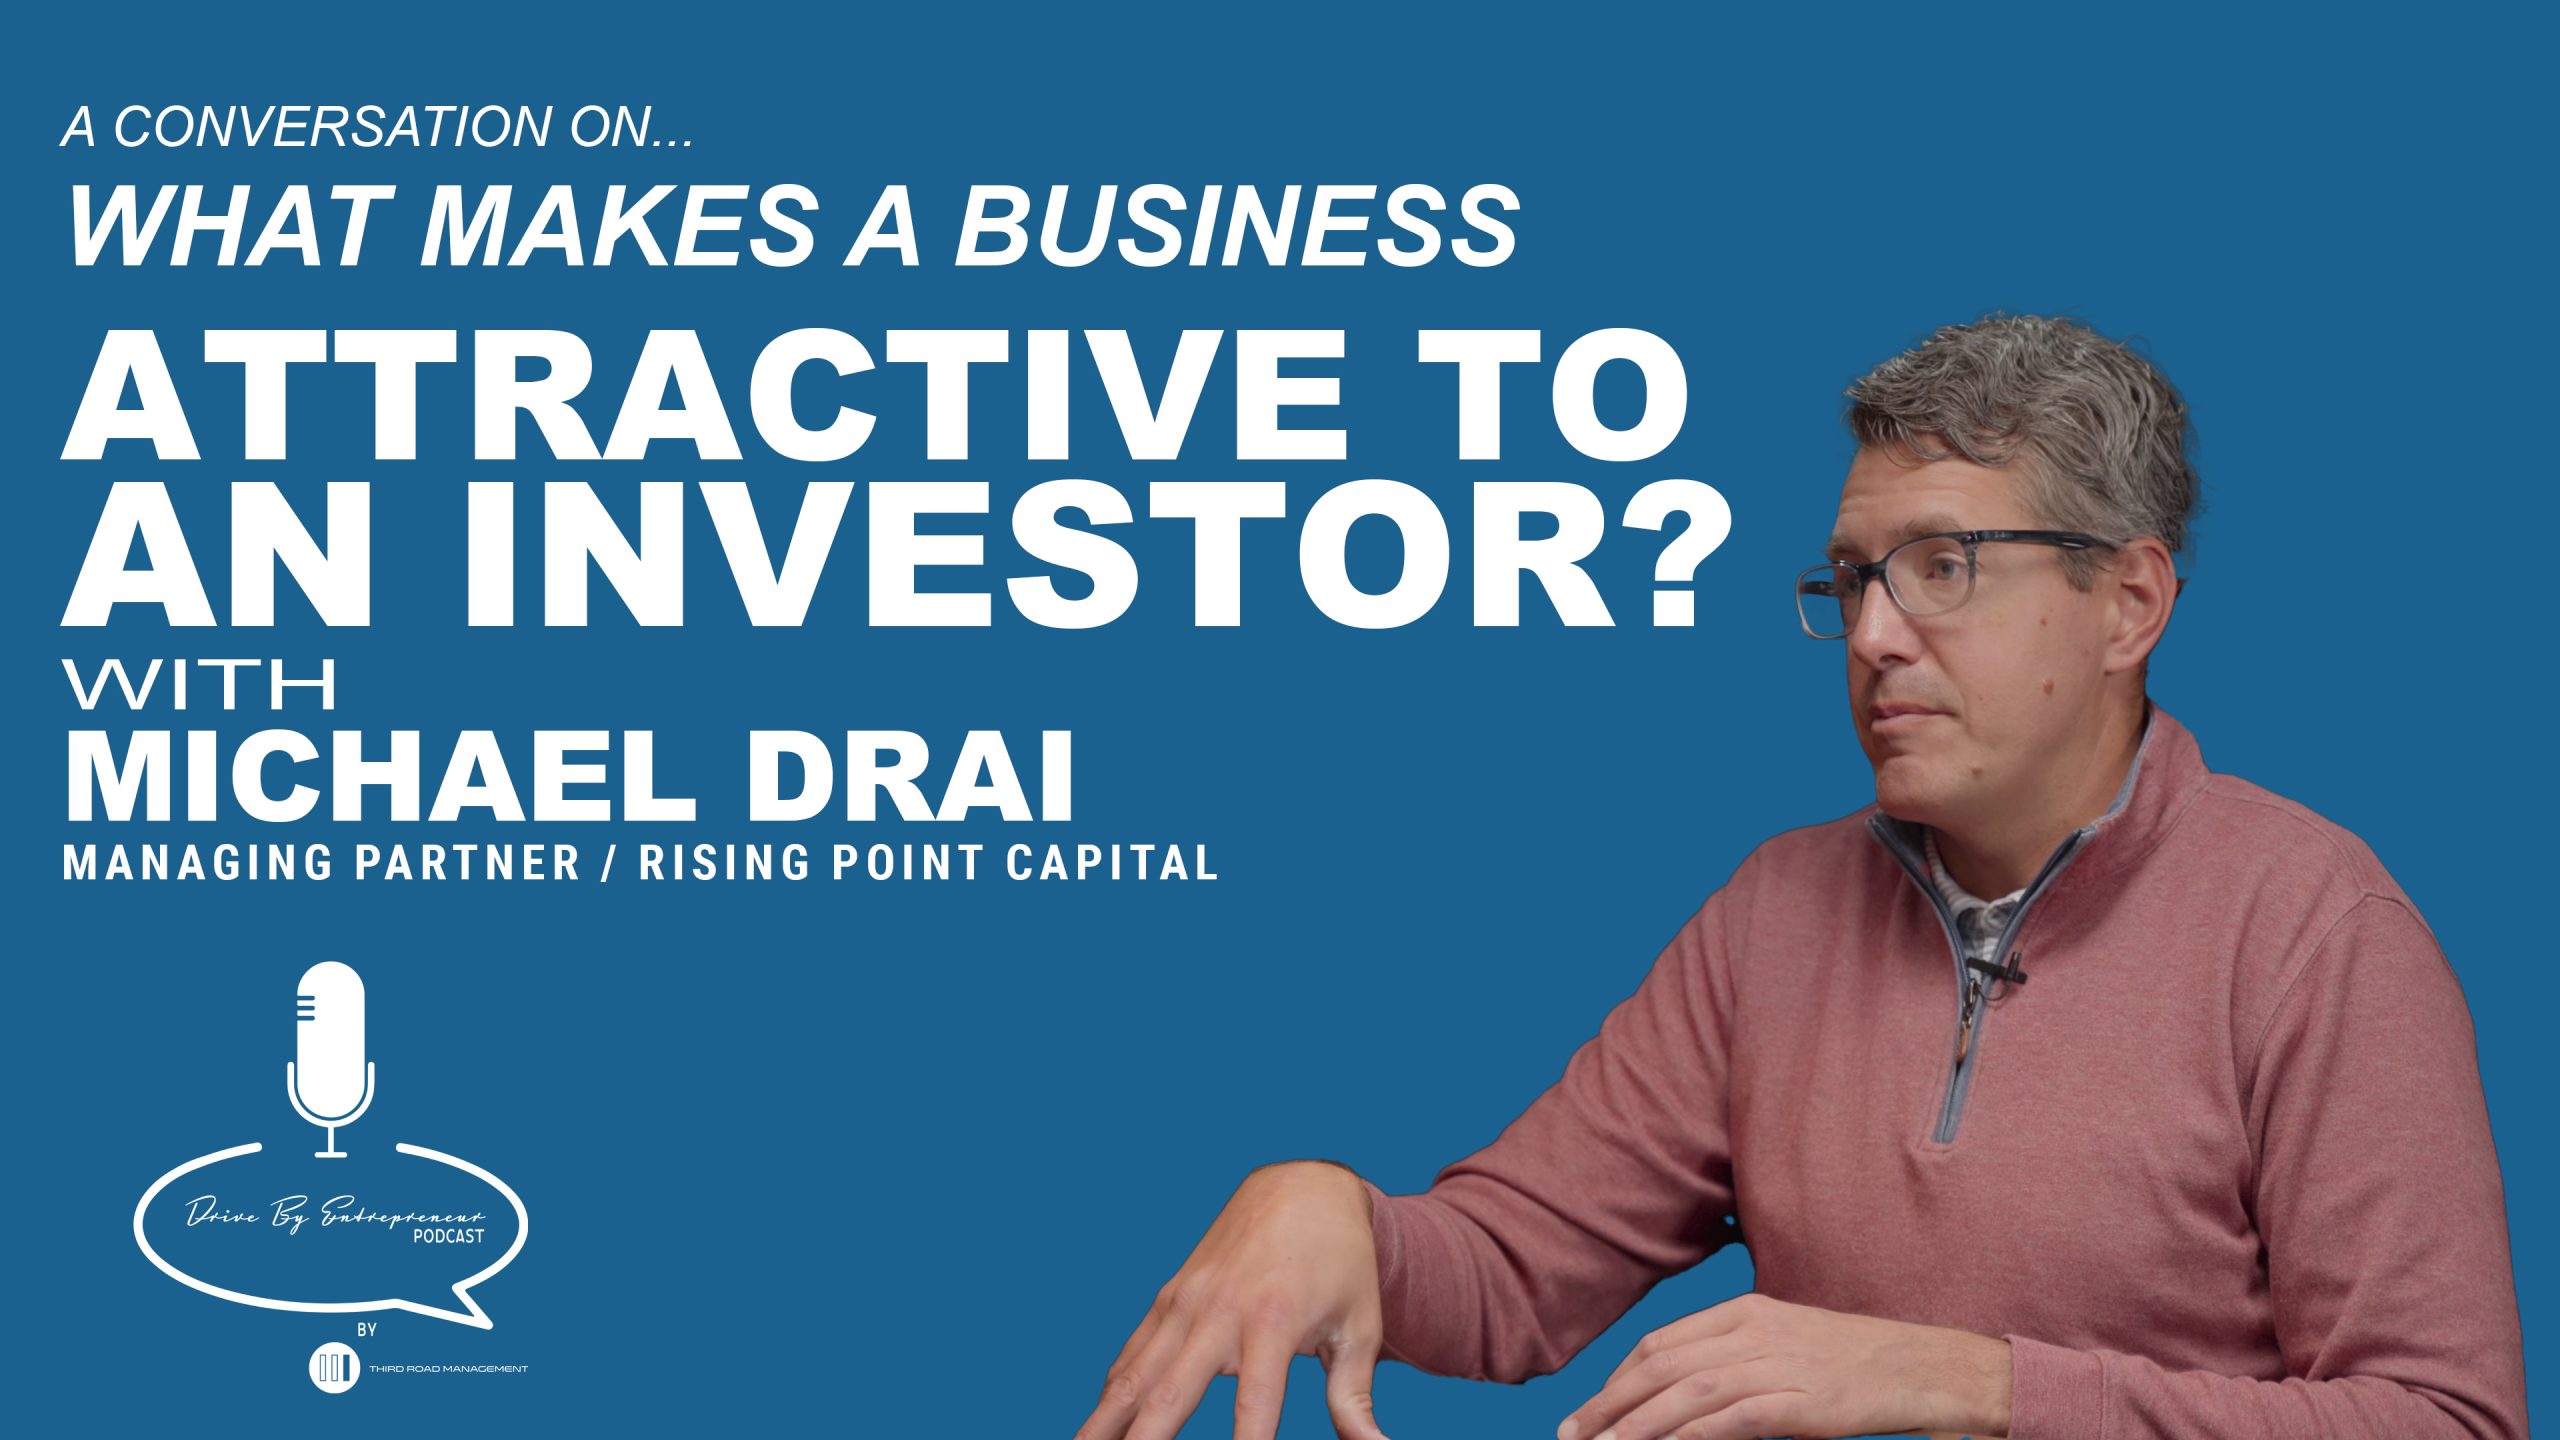 What Makes a Business Attractive To An Investor? – Drive By Entrepreneur Podcast S1E3